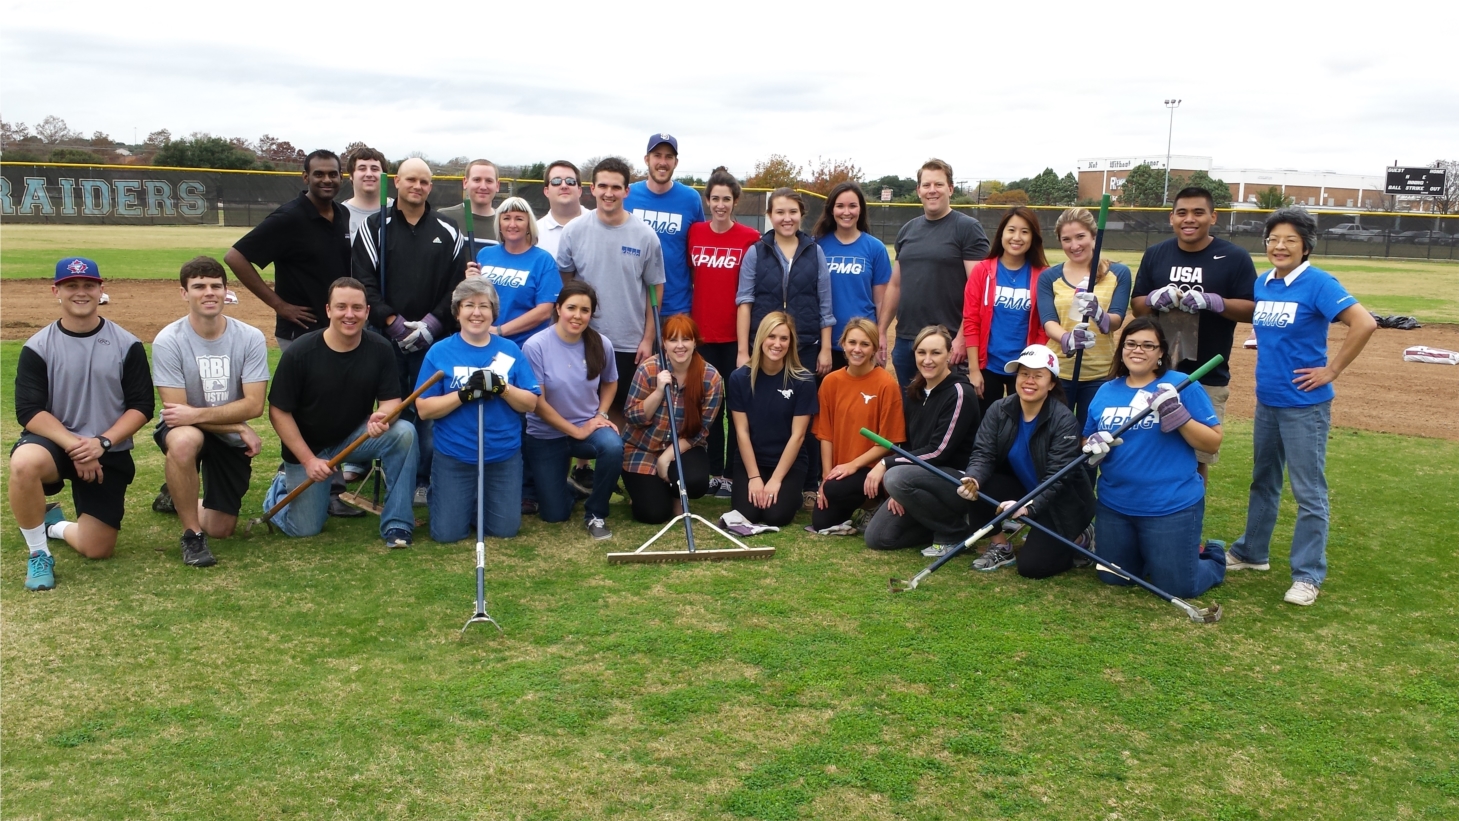 KPMG Work Day Event - Supporting RBI - Field Day at Reagan High School